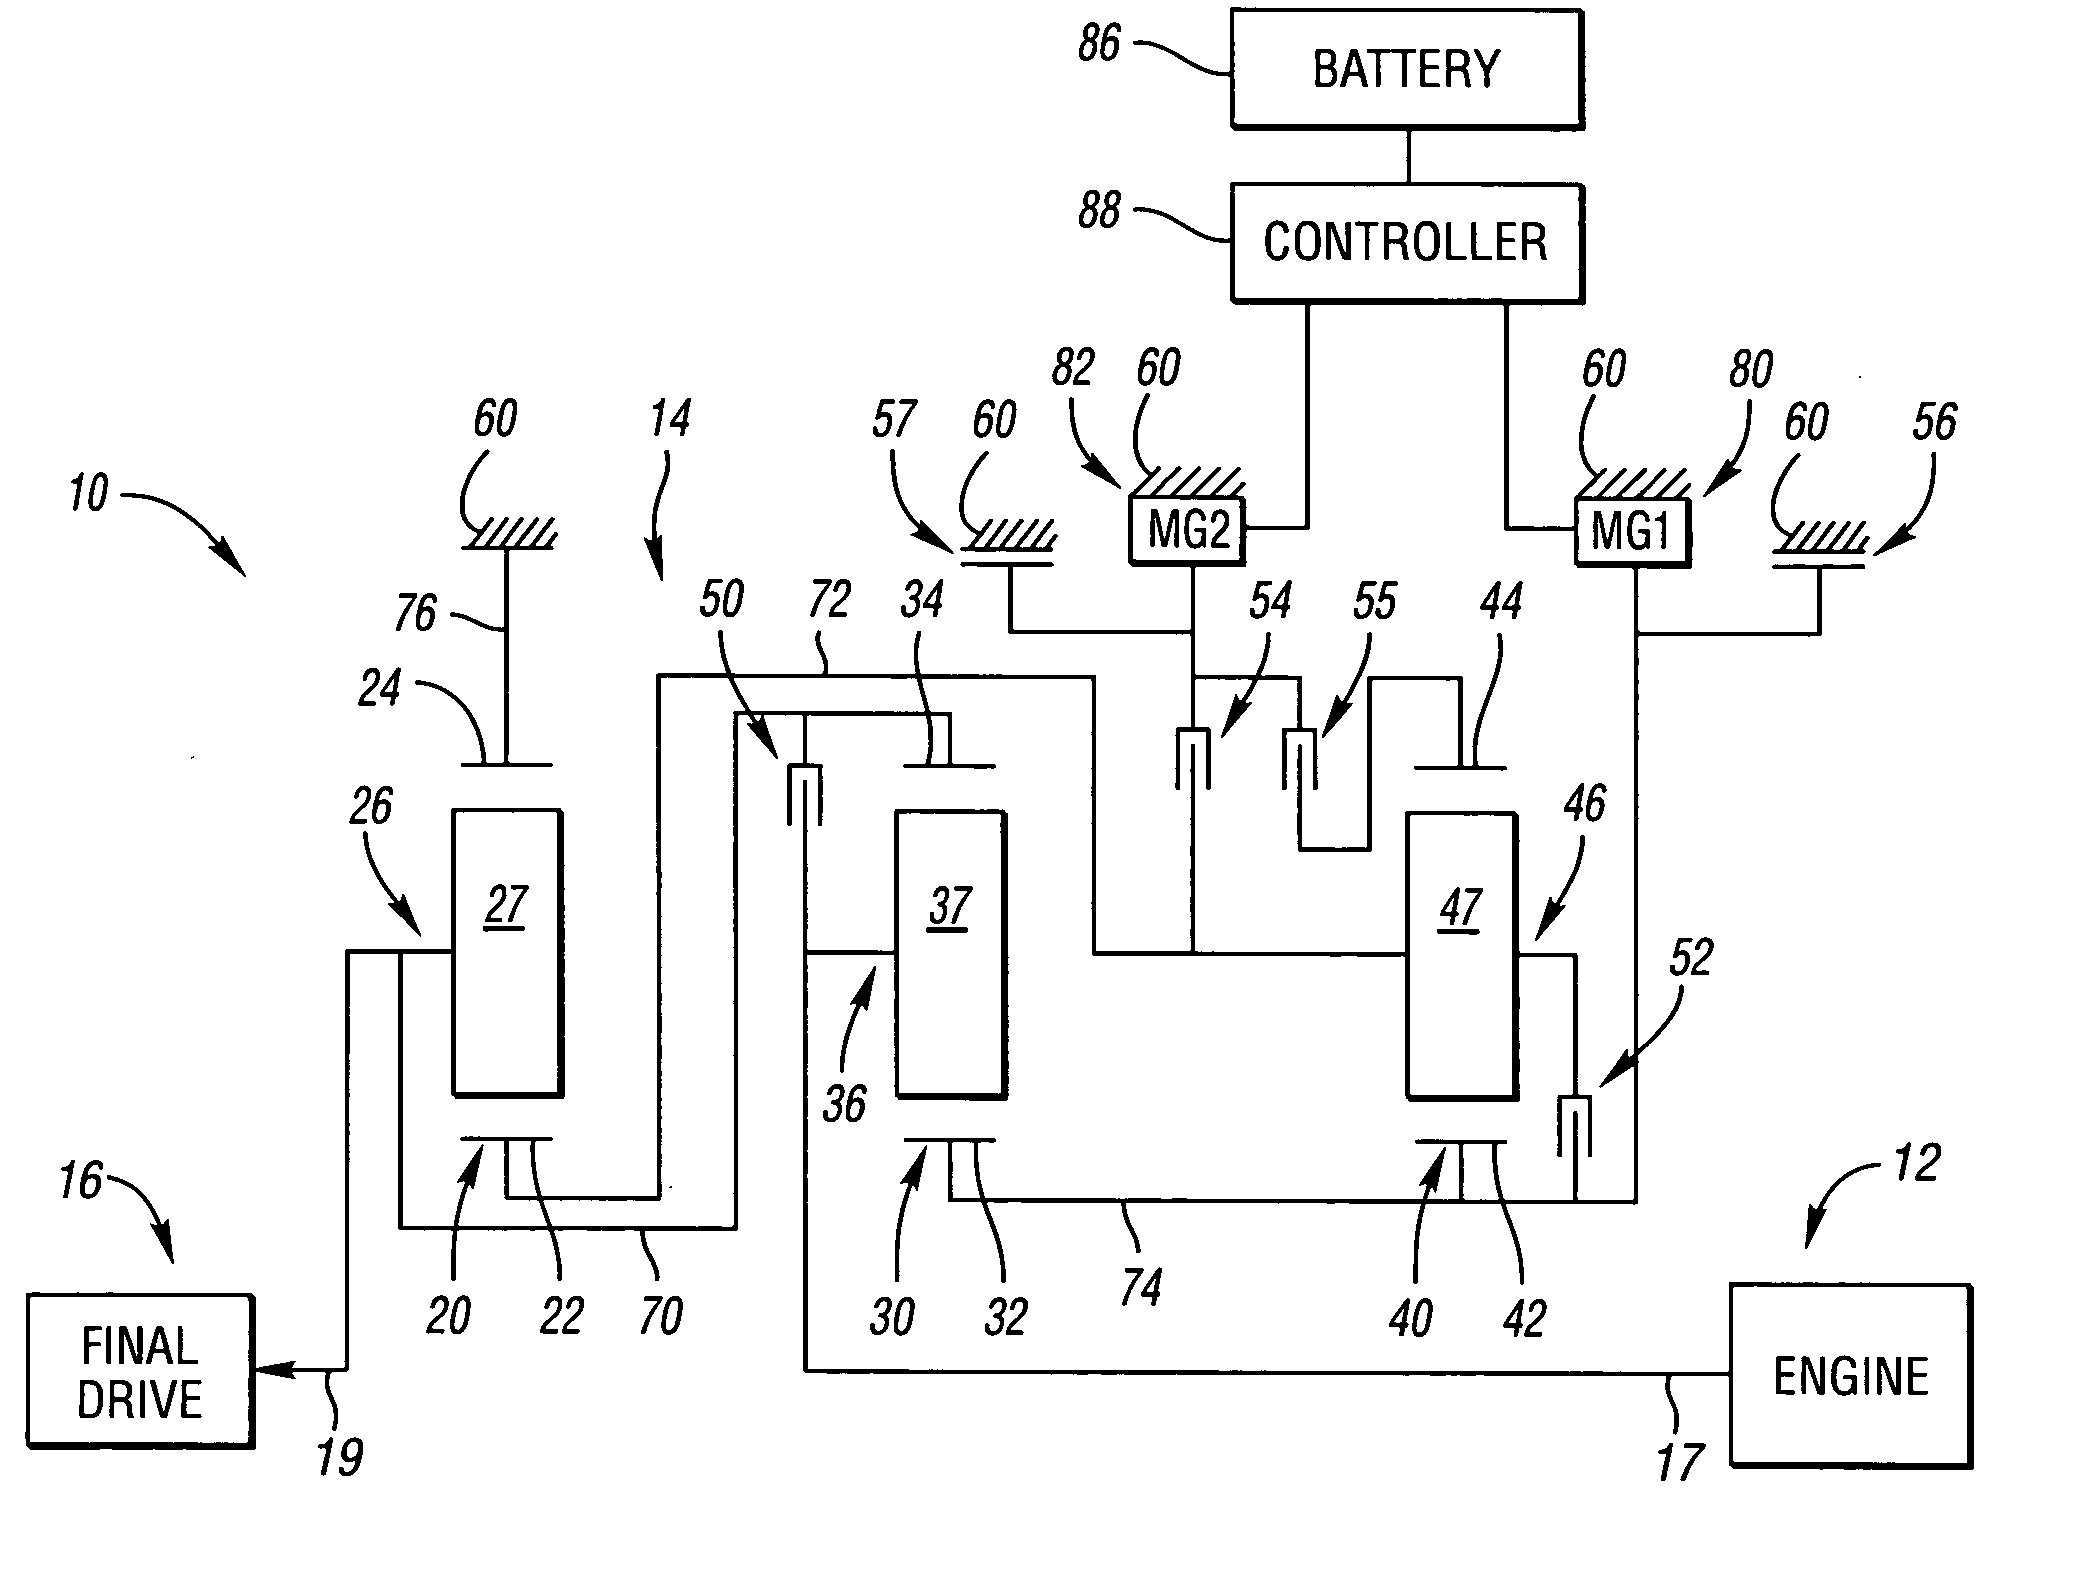 Electrically variable transmission having three planetary gear sets, a stationary member and three fixed interconnections